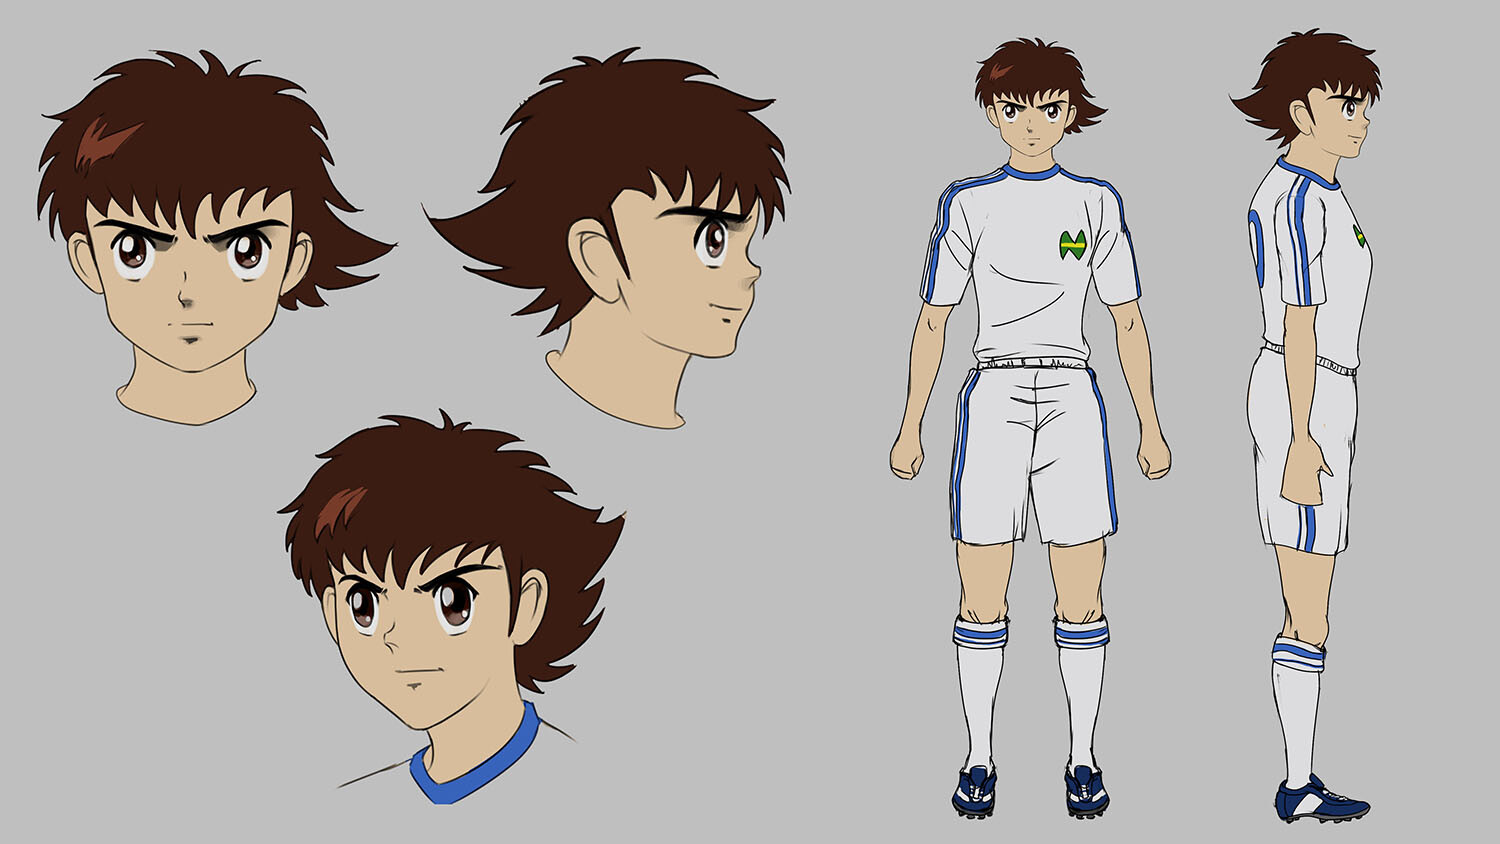 Using Reference Photos to Pose your own Anime Character Captain Tsubasa   Steemit